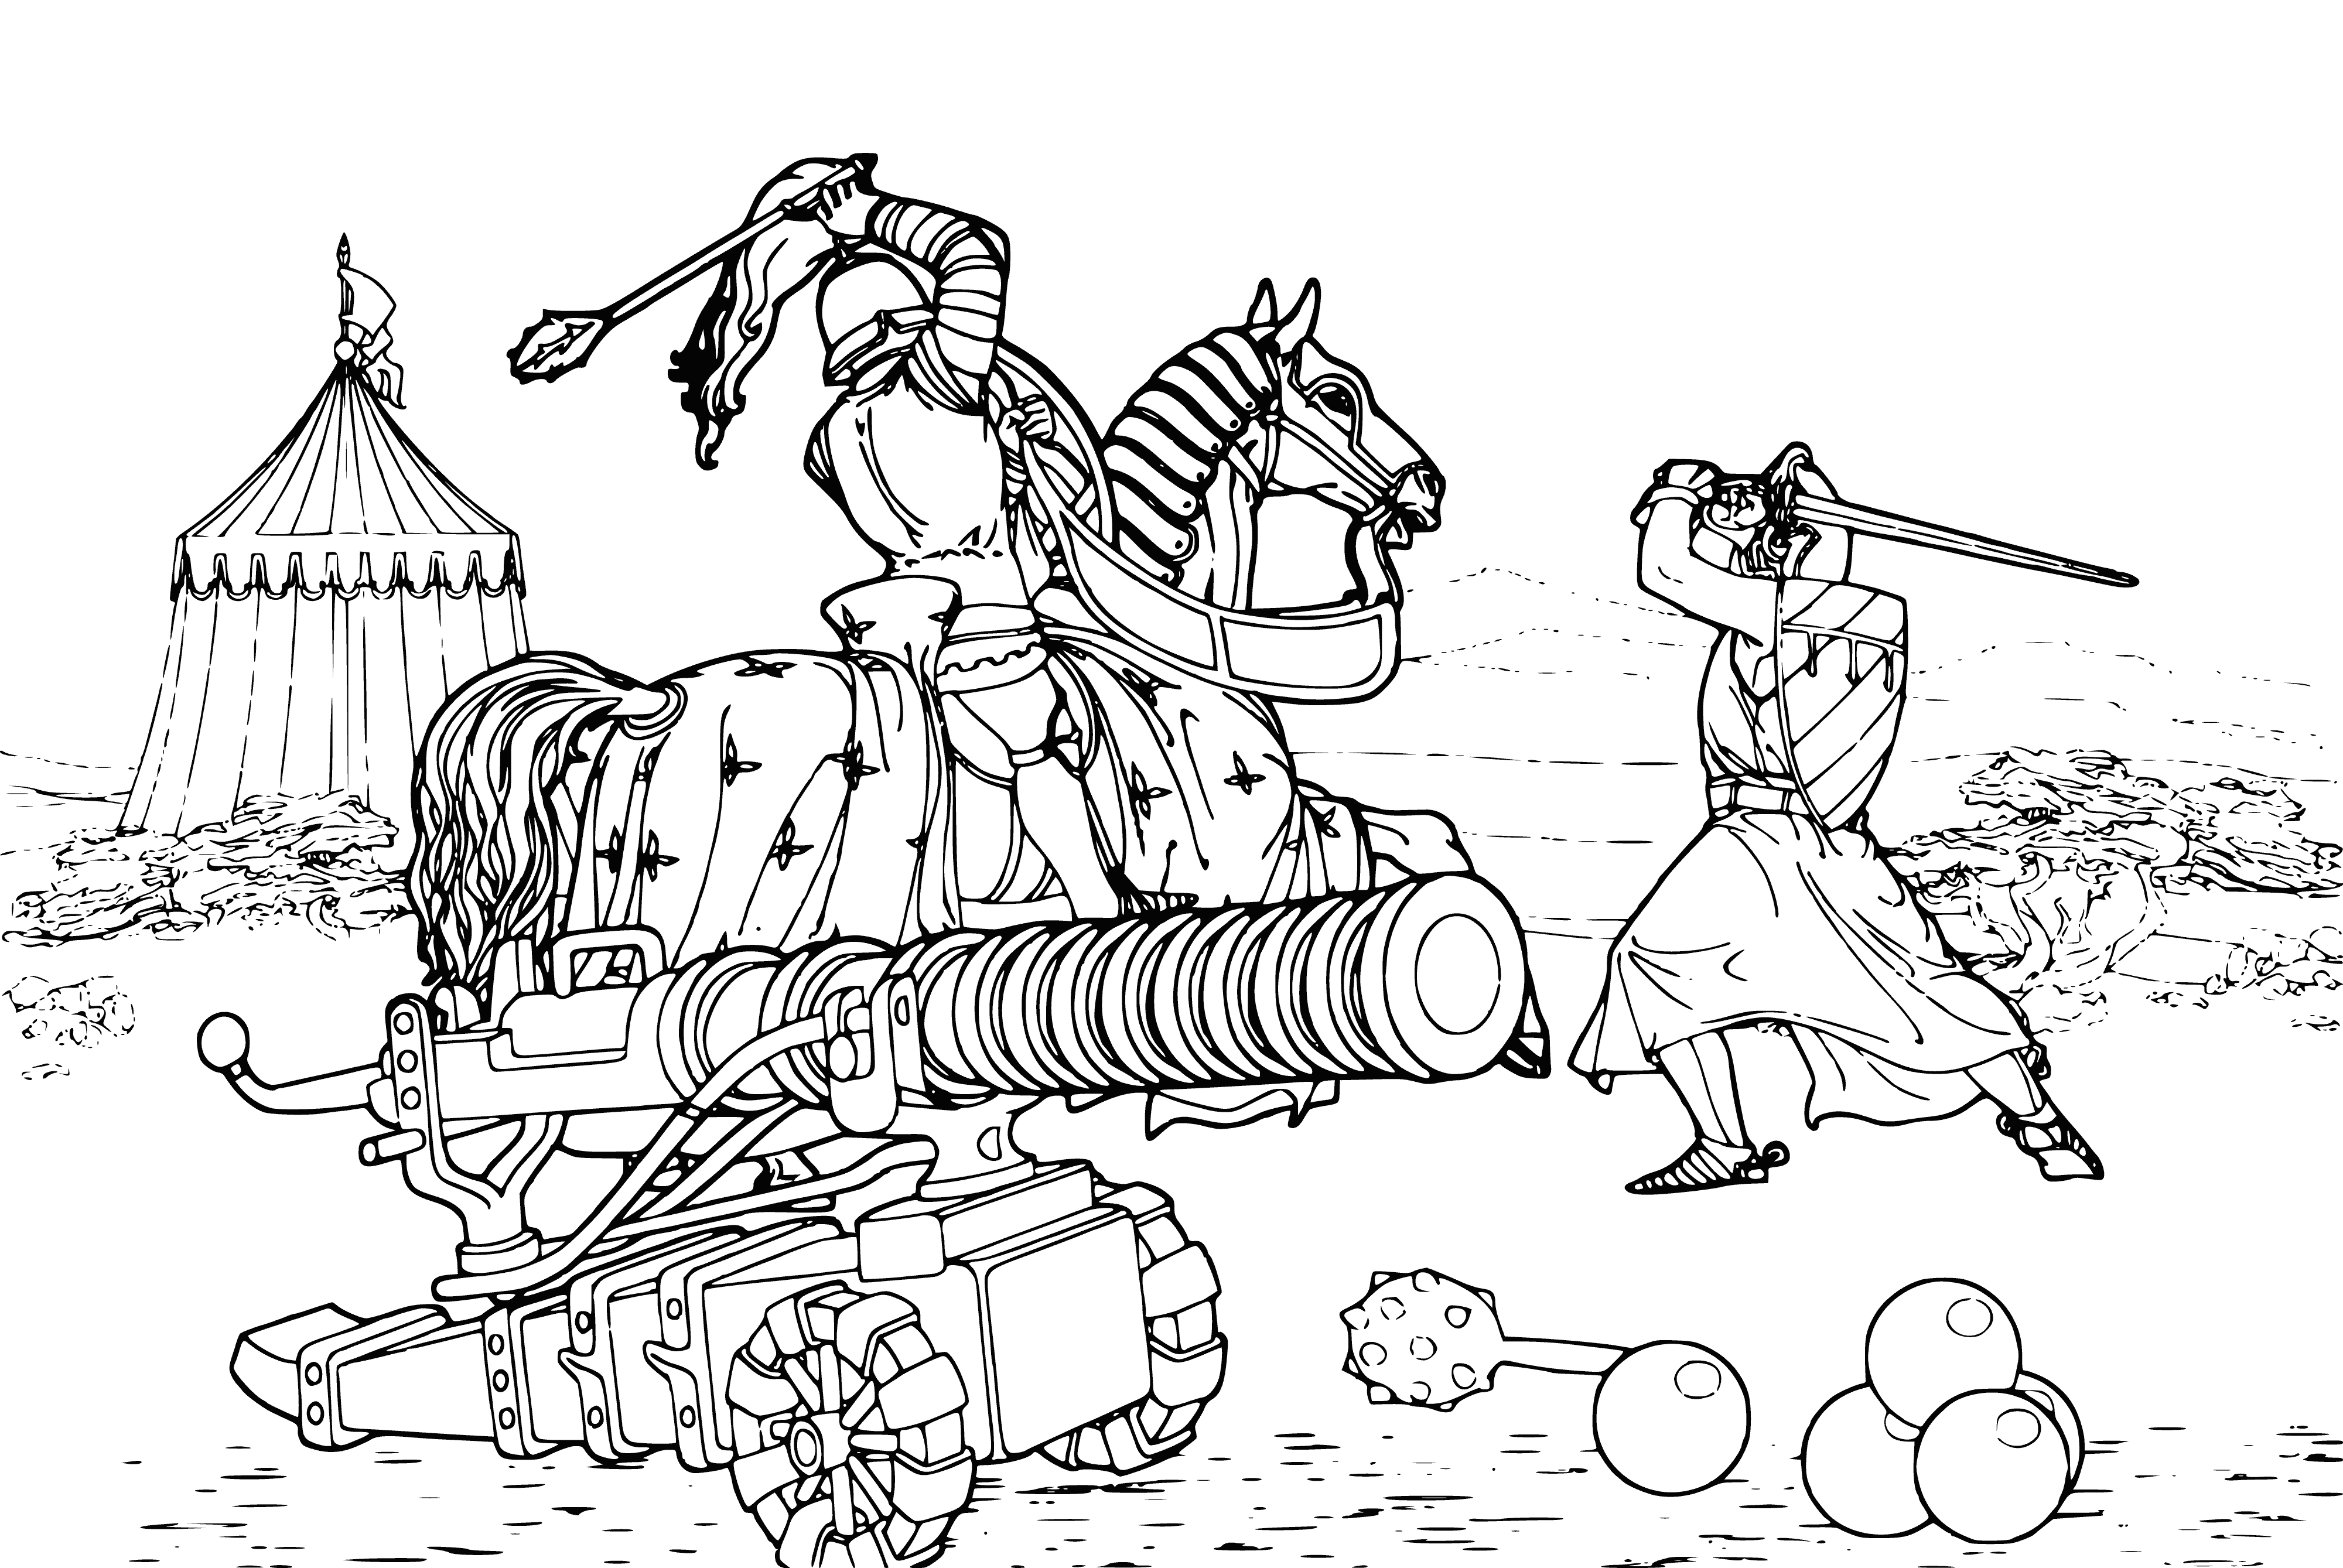 Weapon protection coloring page